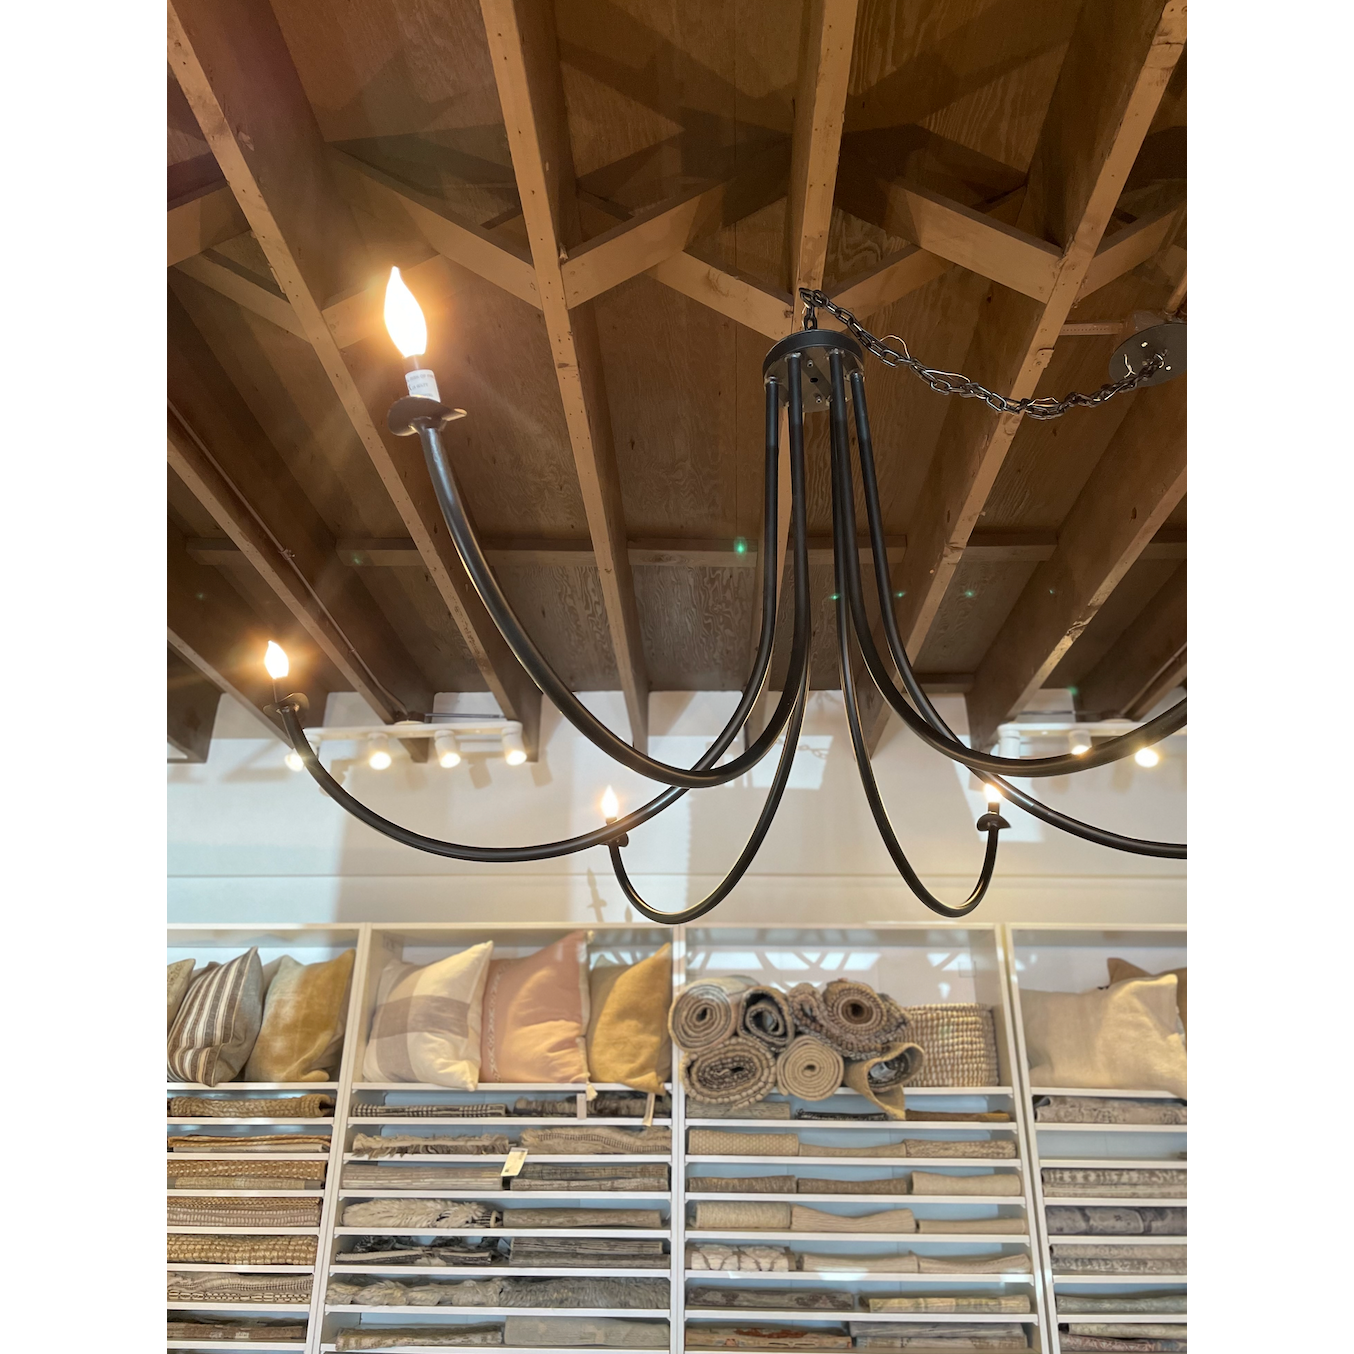 Add unique and modern lighting to a room with this Ramo Chandelier from Cisco Brothers. The curved arms add beautiful sight lines to the fixture and plenty of light.  Overall: 60”dia. 30.5"h Chain Length: 3' Canopy: 6"dia